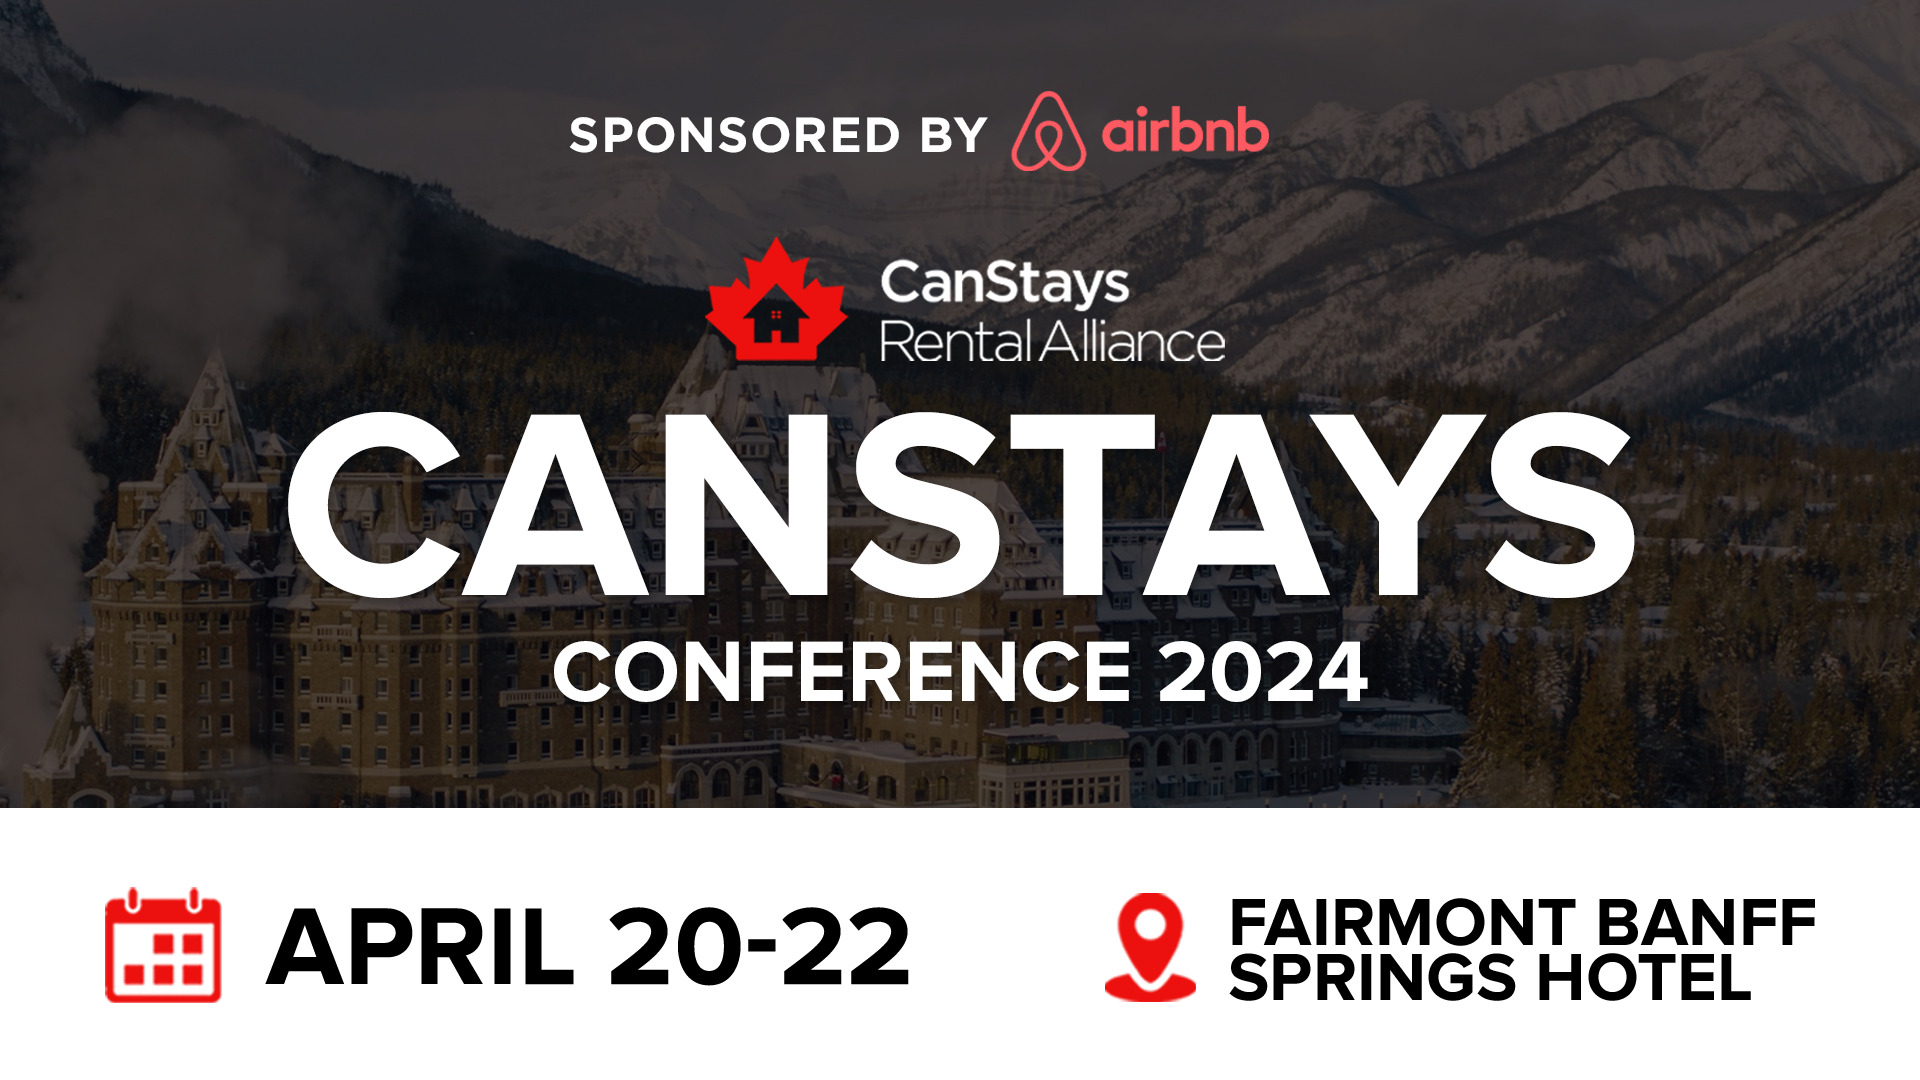 Canstays Conference 2024